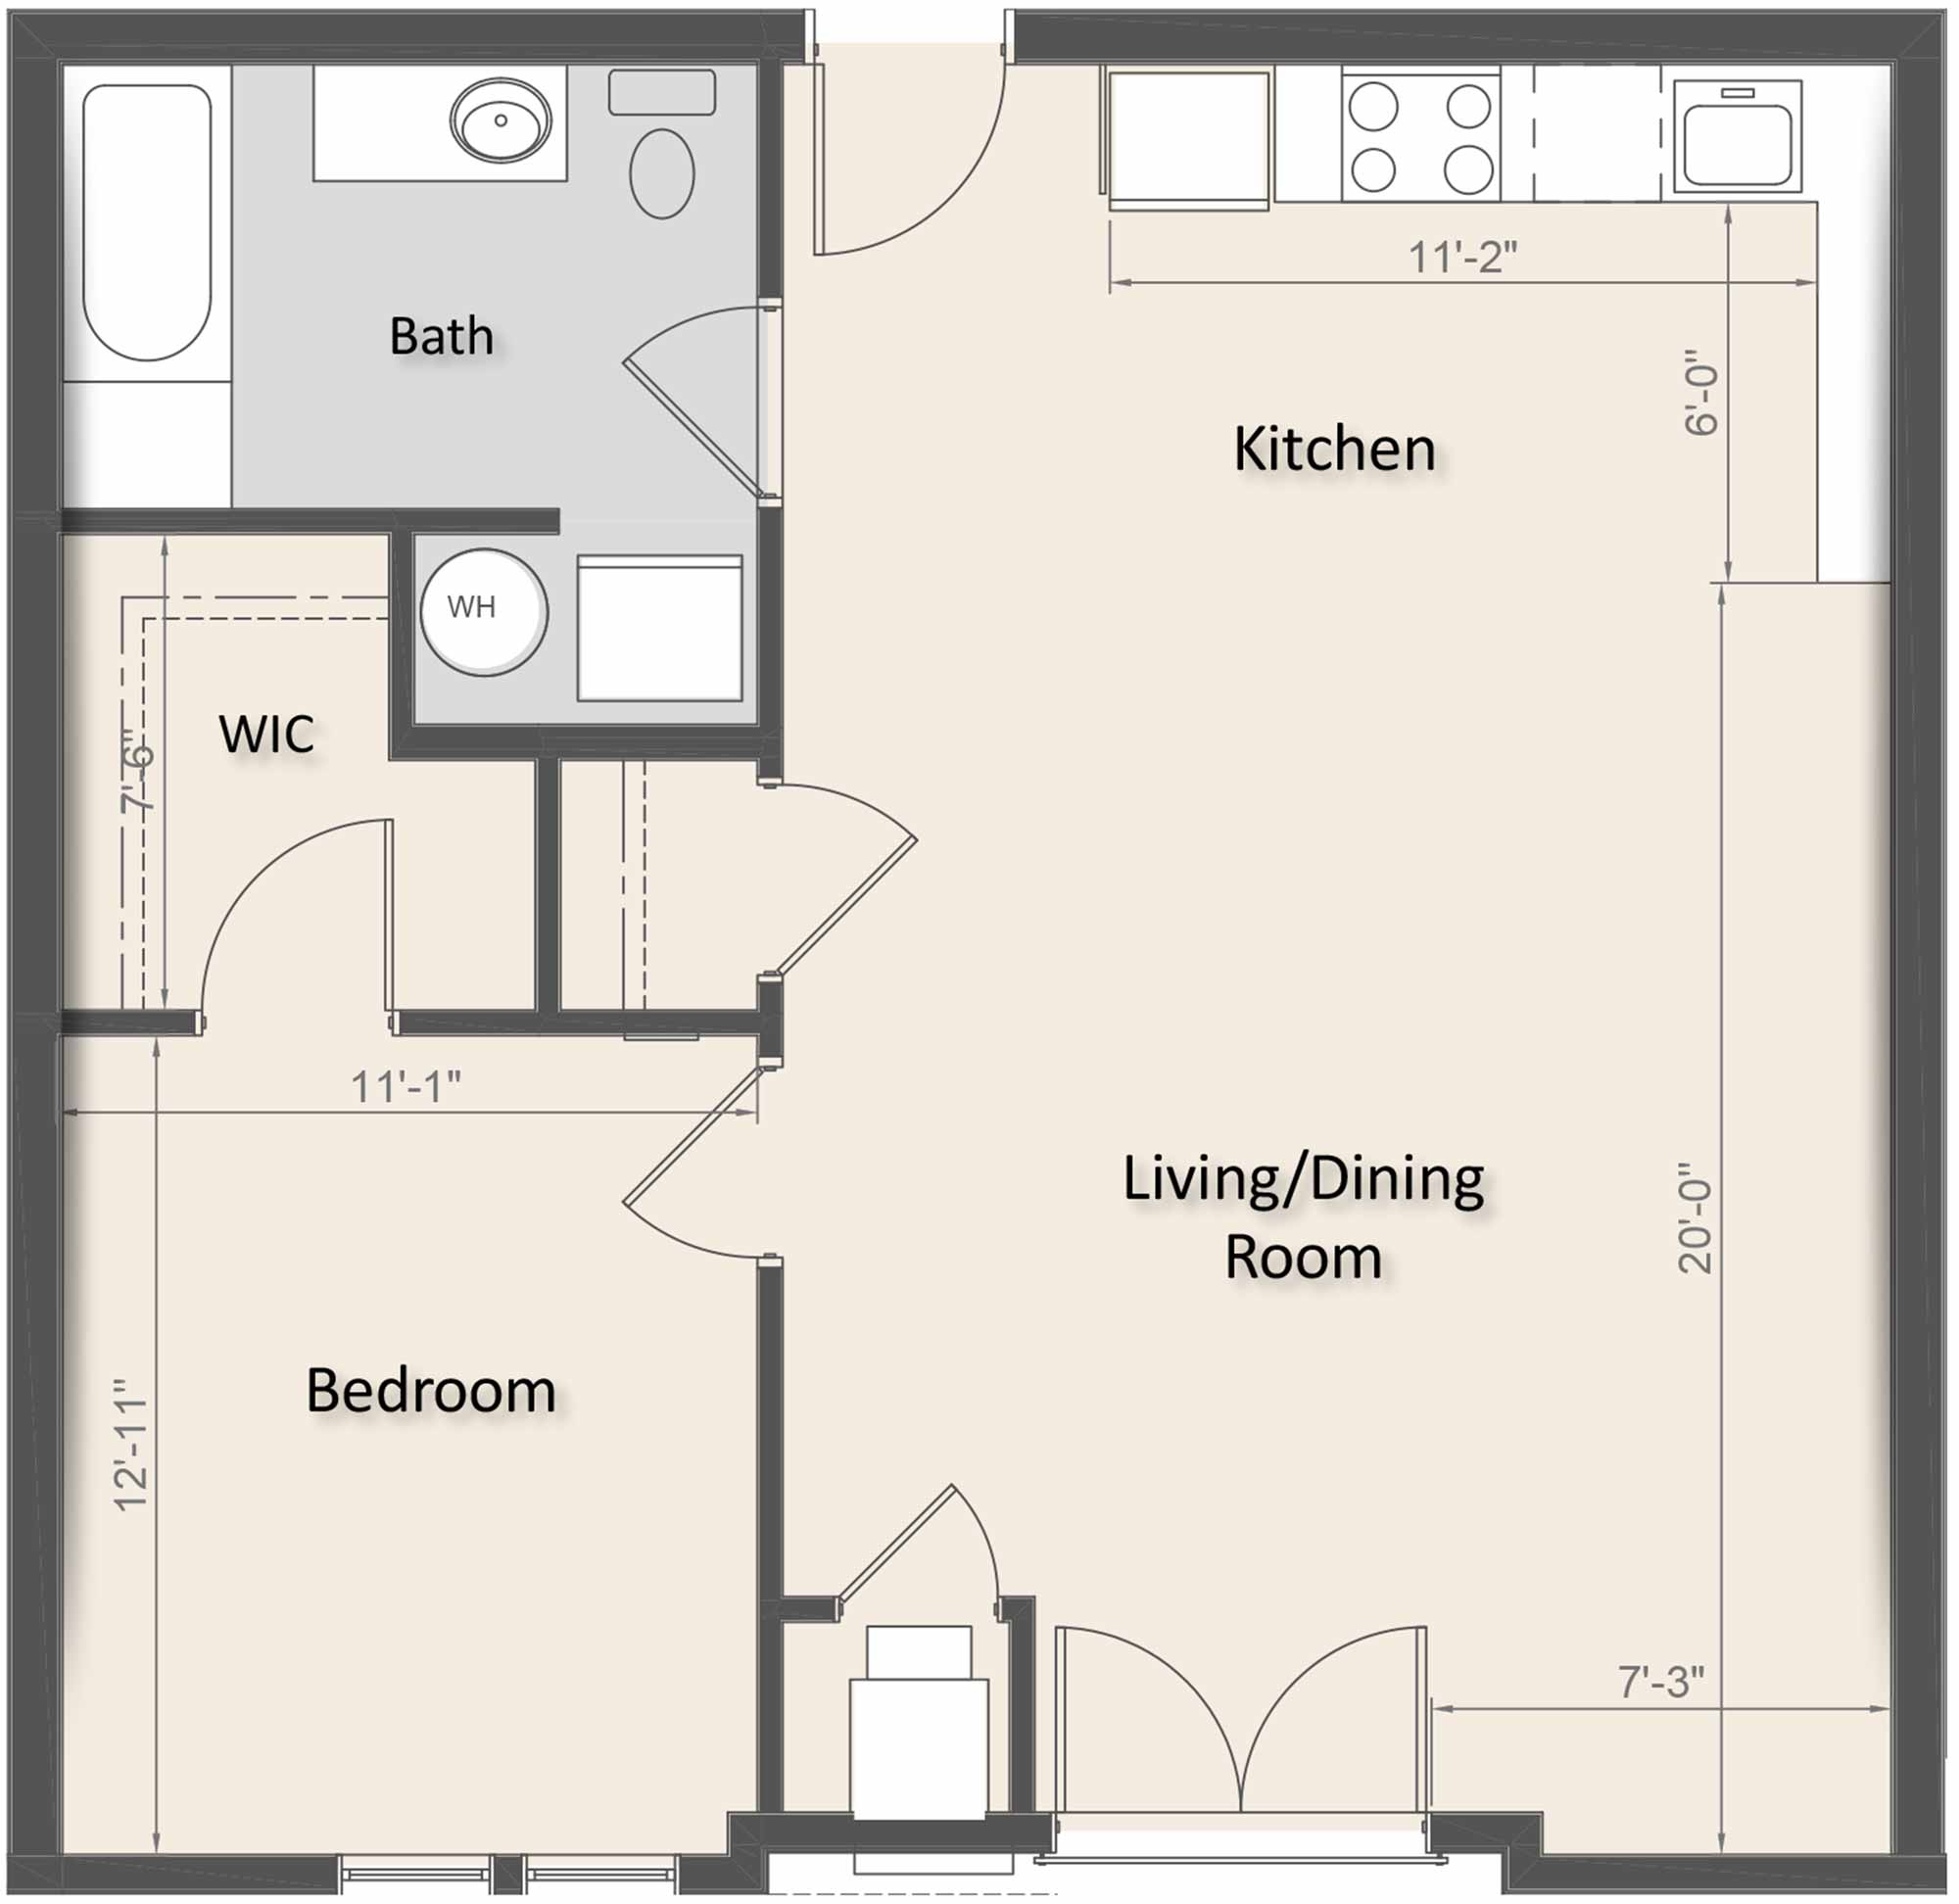 UNIT 404 - ONE BEDROOM (812 SF)